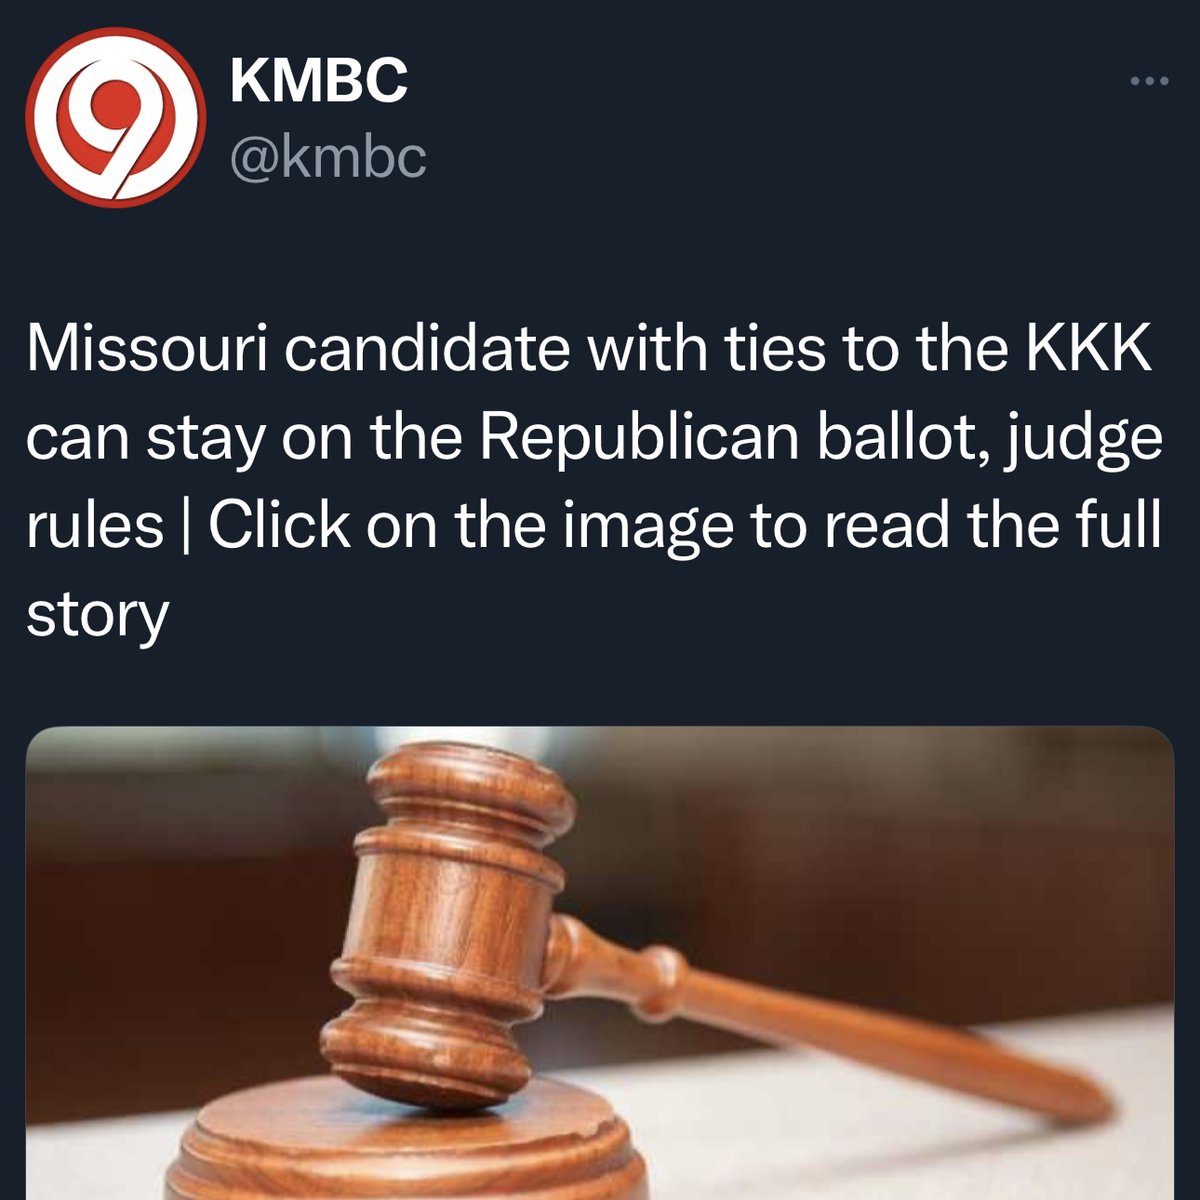 Remember, Missouri - this November you can vote for the party that does NOT have a “candidate with ties to the KKK” on the ballot. #moleg #mogov #mosen